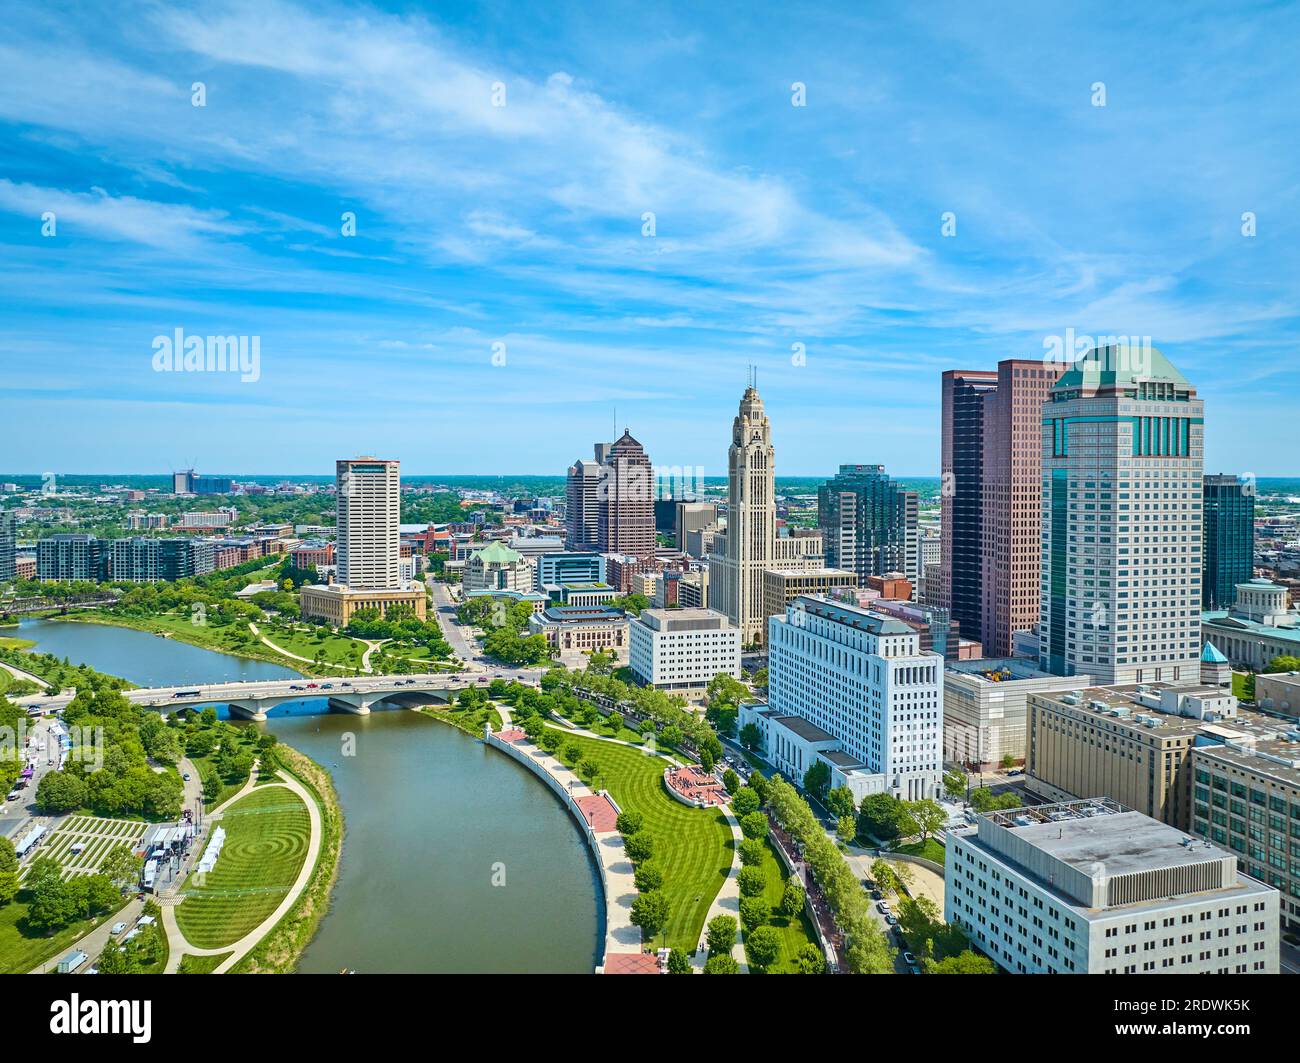 Aerial Columbus Ohio with river greenway and promenade next to downtown buildings Stock Photo